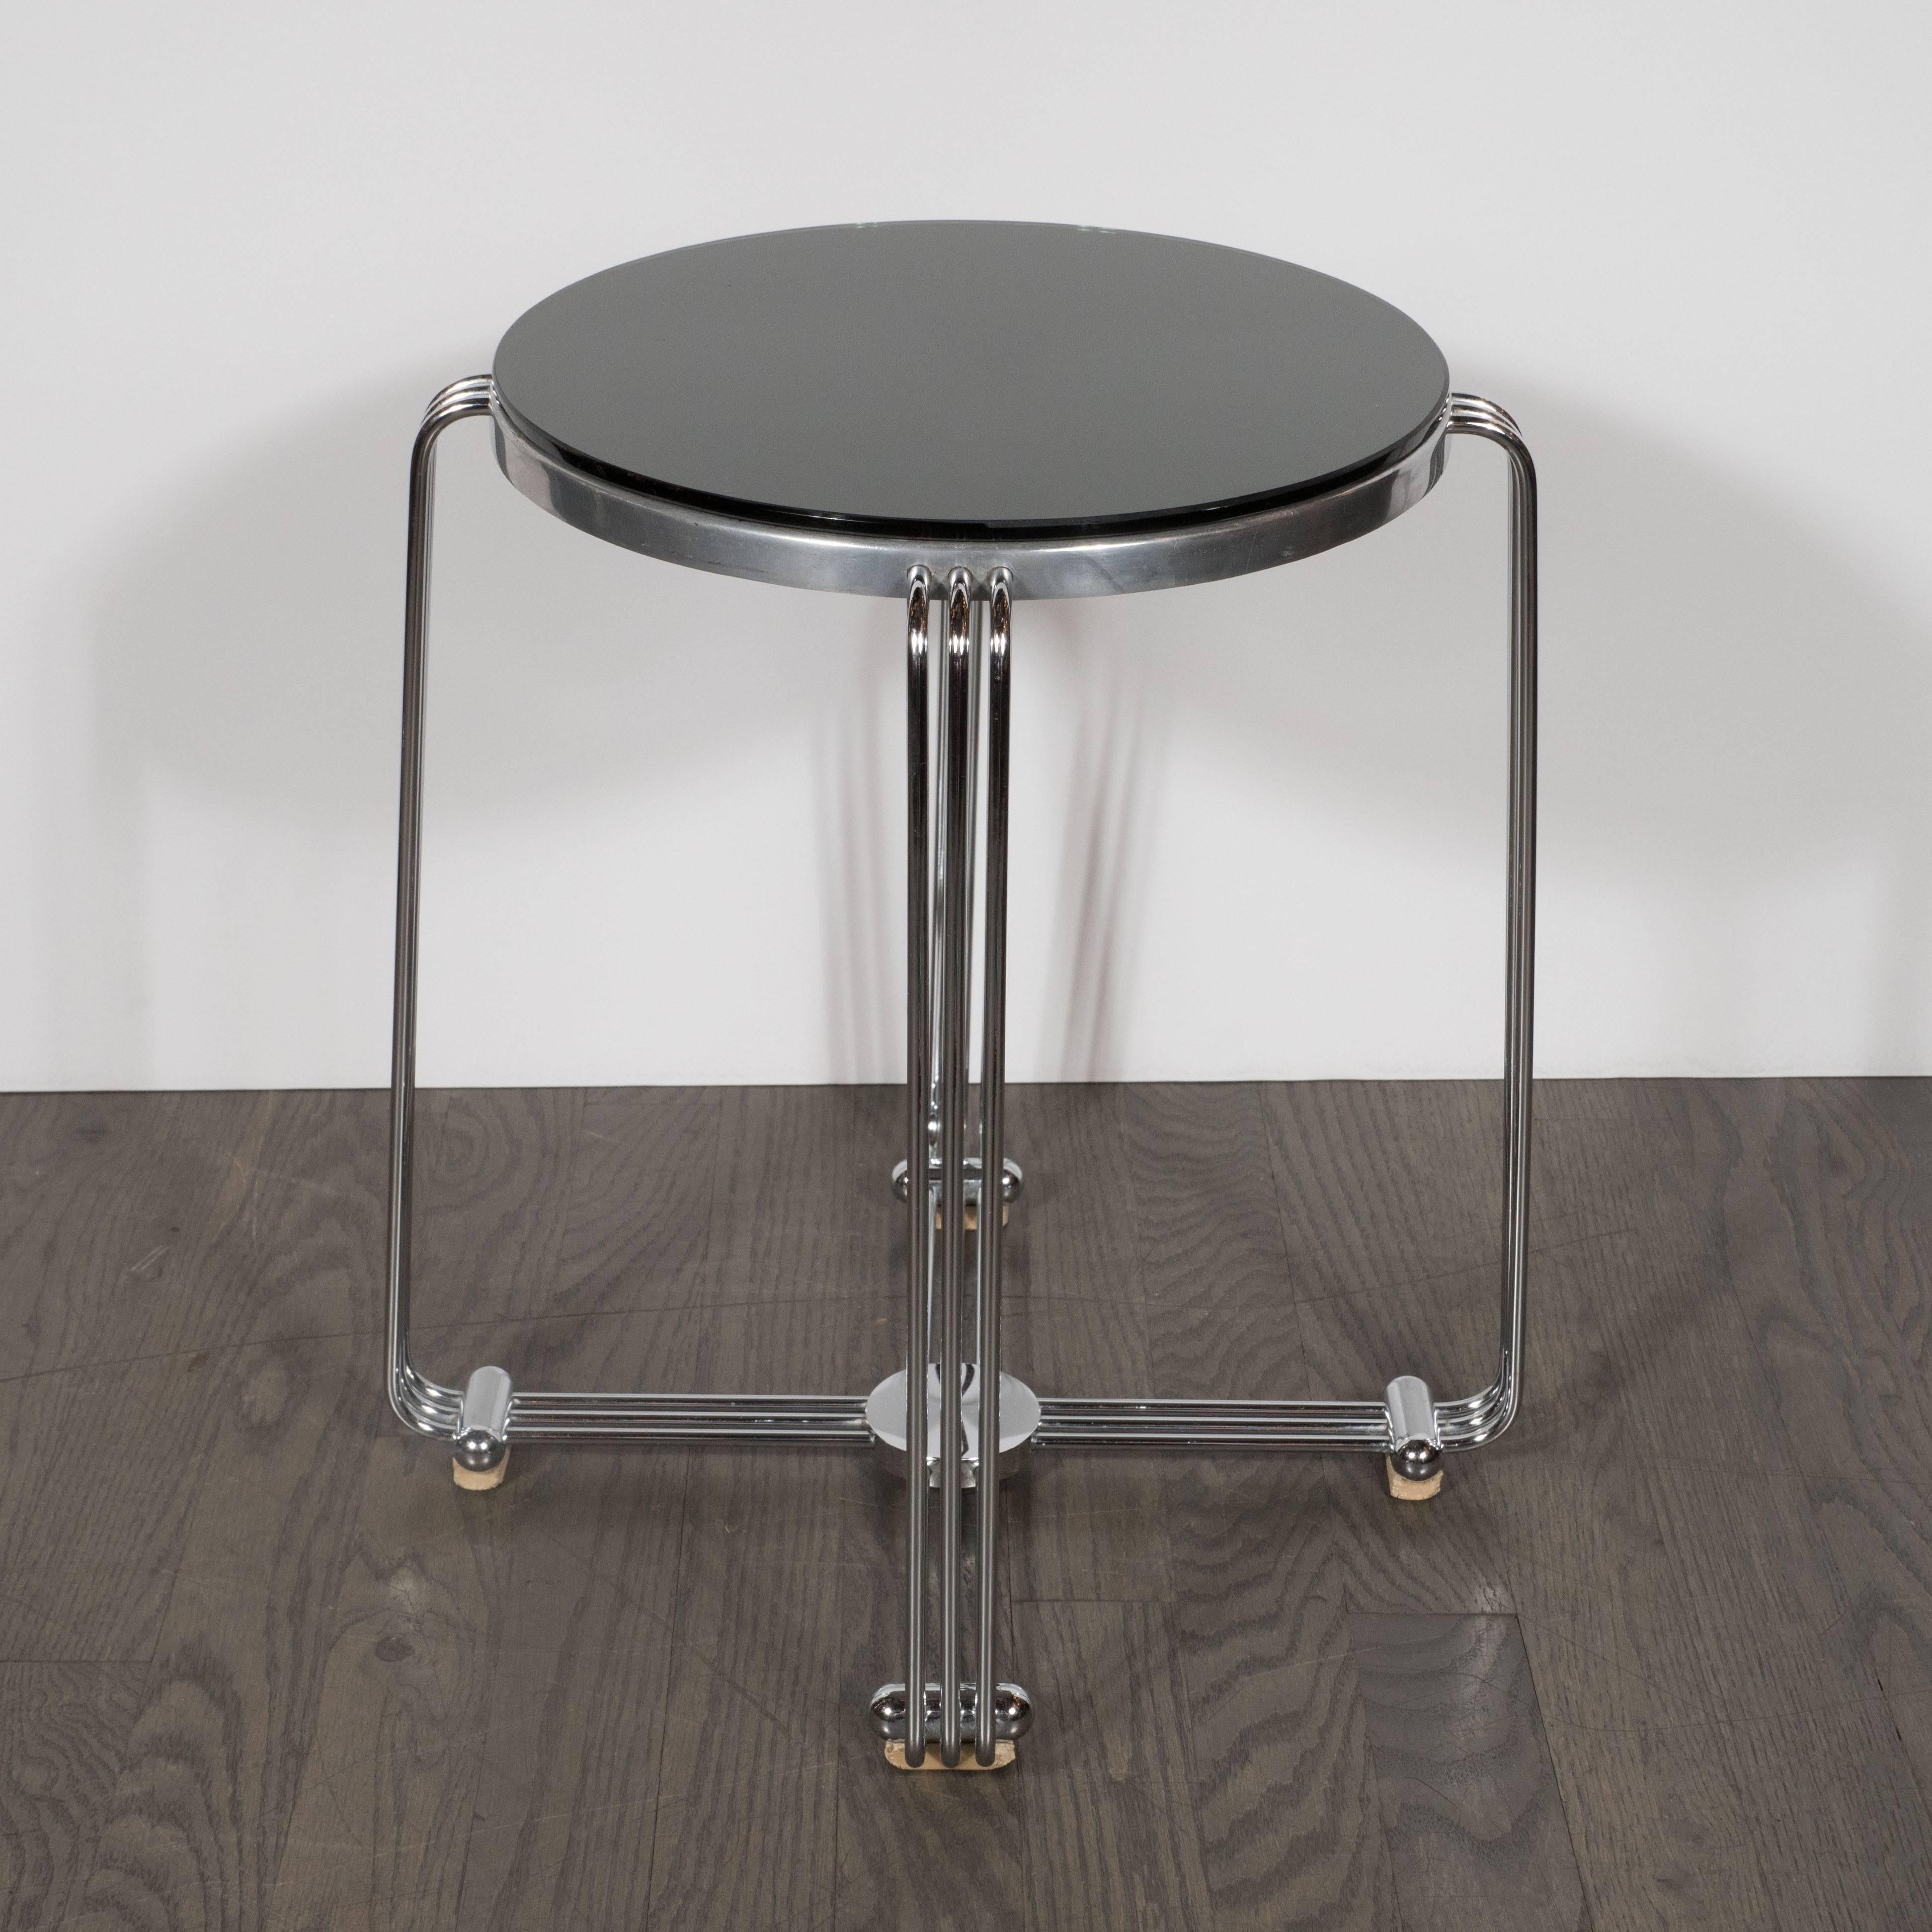 This refined drinks table exemplifies Machine Age Art Deco in America at its finest. With its streamlined Silhouette and clean lines, this table showcases designers from this epoch's ability to elevate Industrial materials to the sublime. The